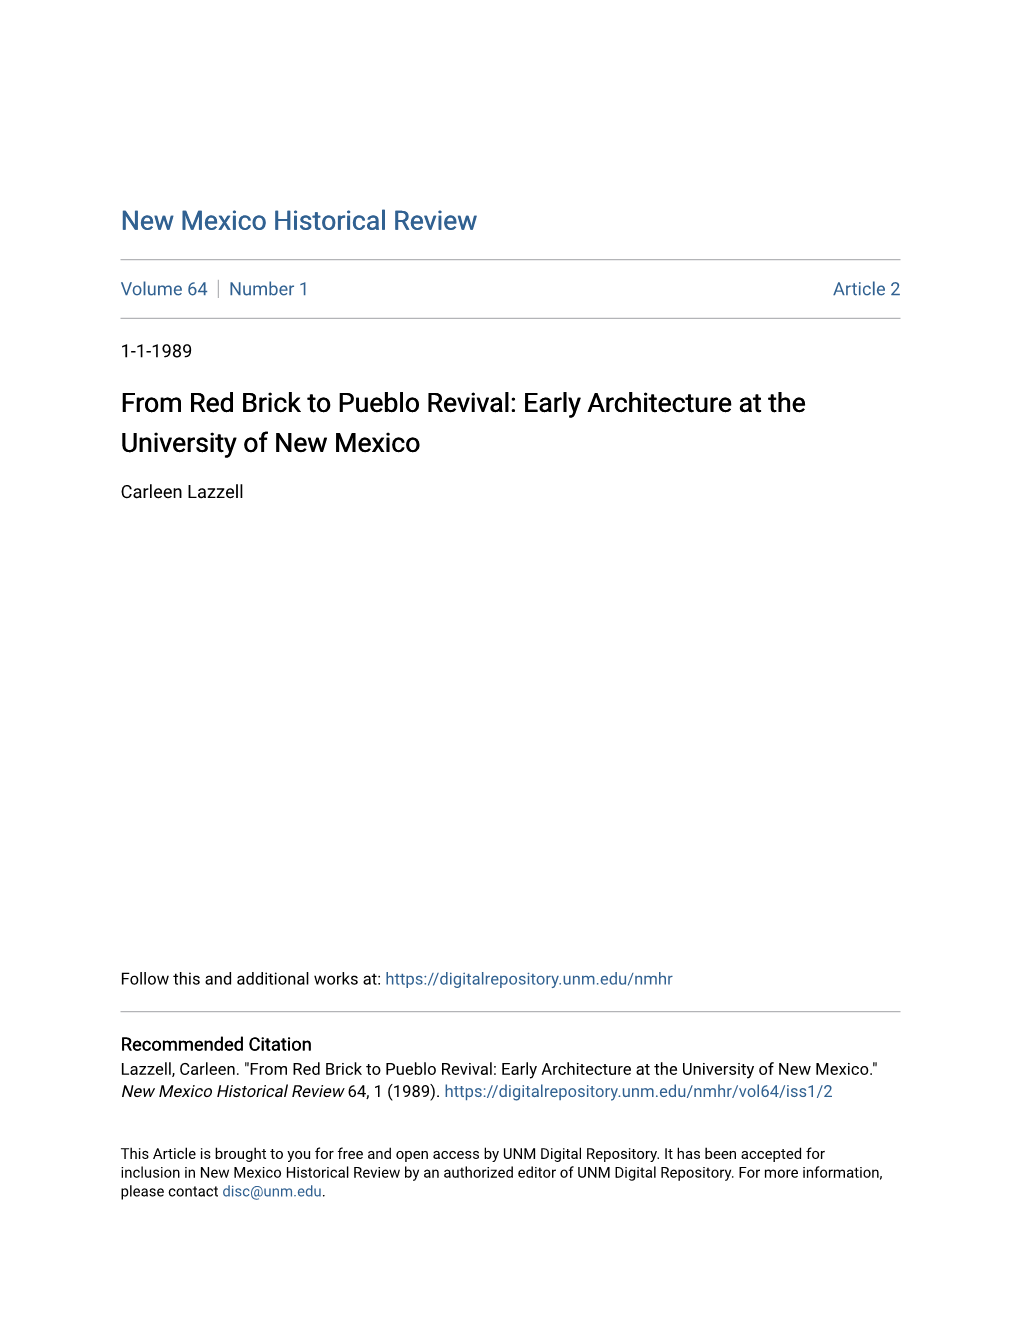 From Red Brick to Pueblo Revival: Early Architecture at the University of New Mexico